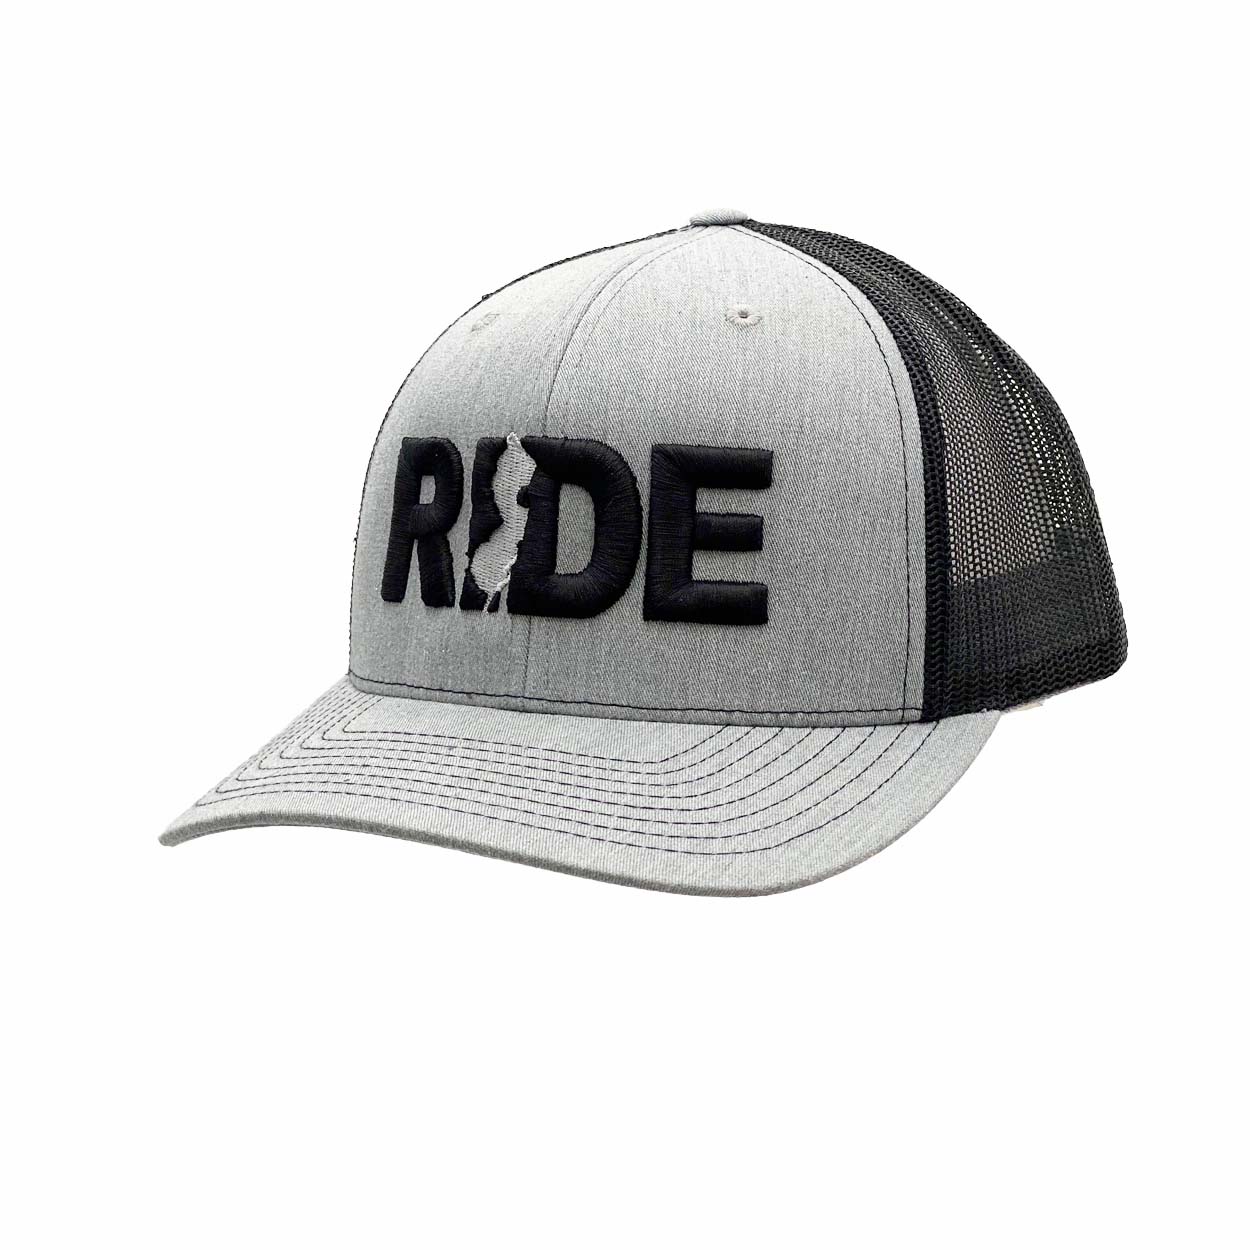 Ride New Jersey Classic Embroidered Snapback Trucker Hat Heather Gray/Black